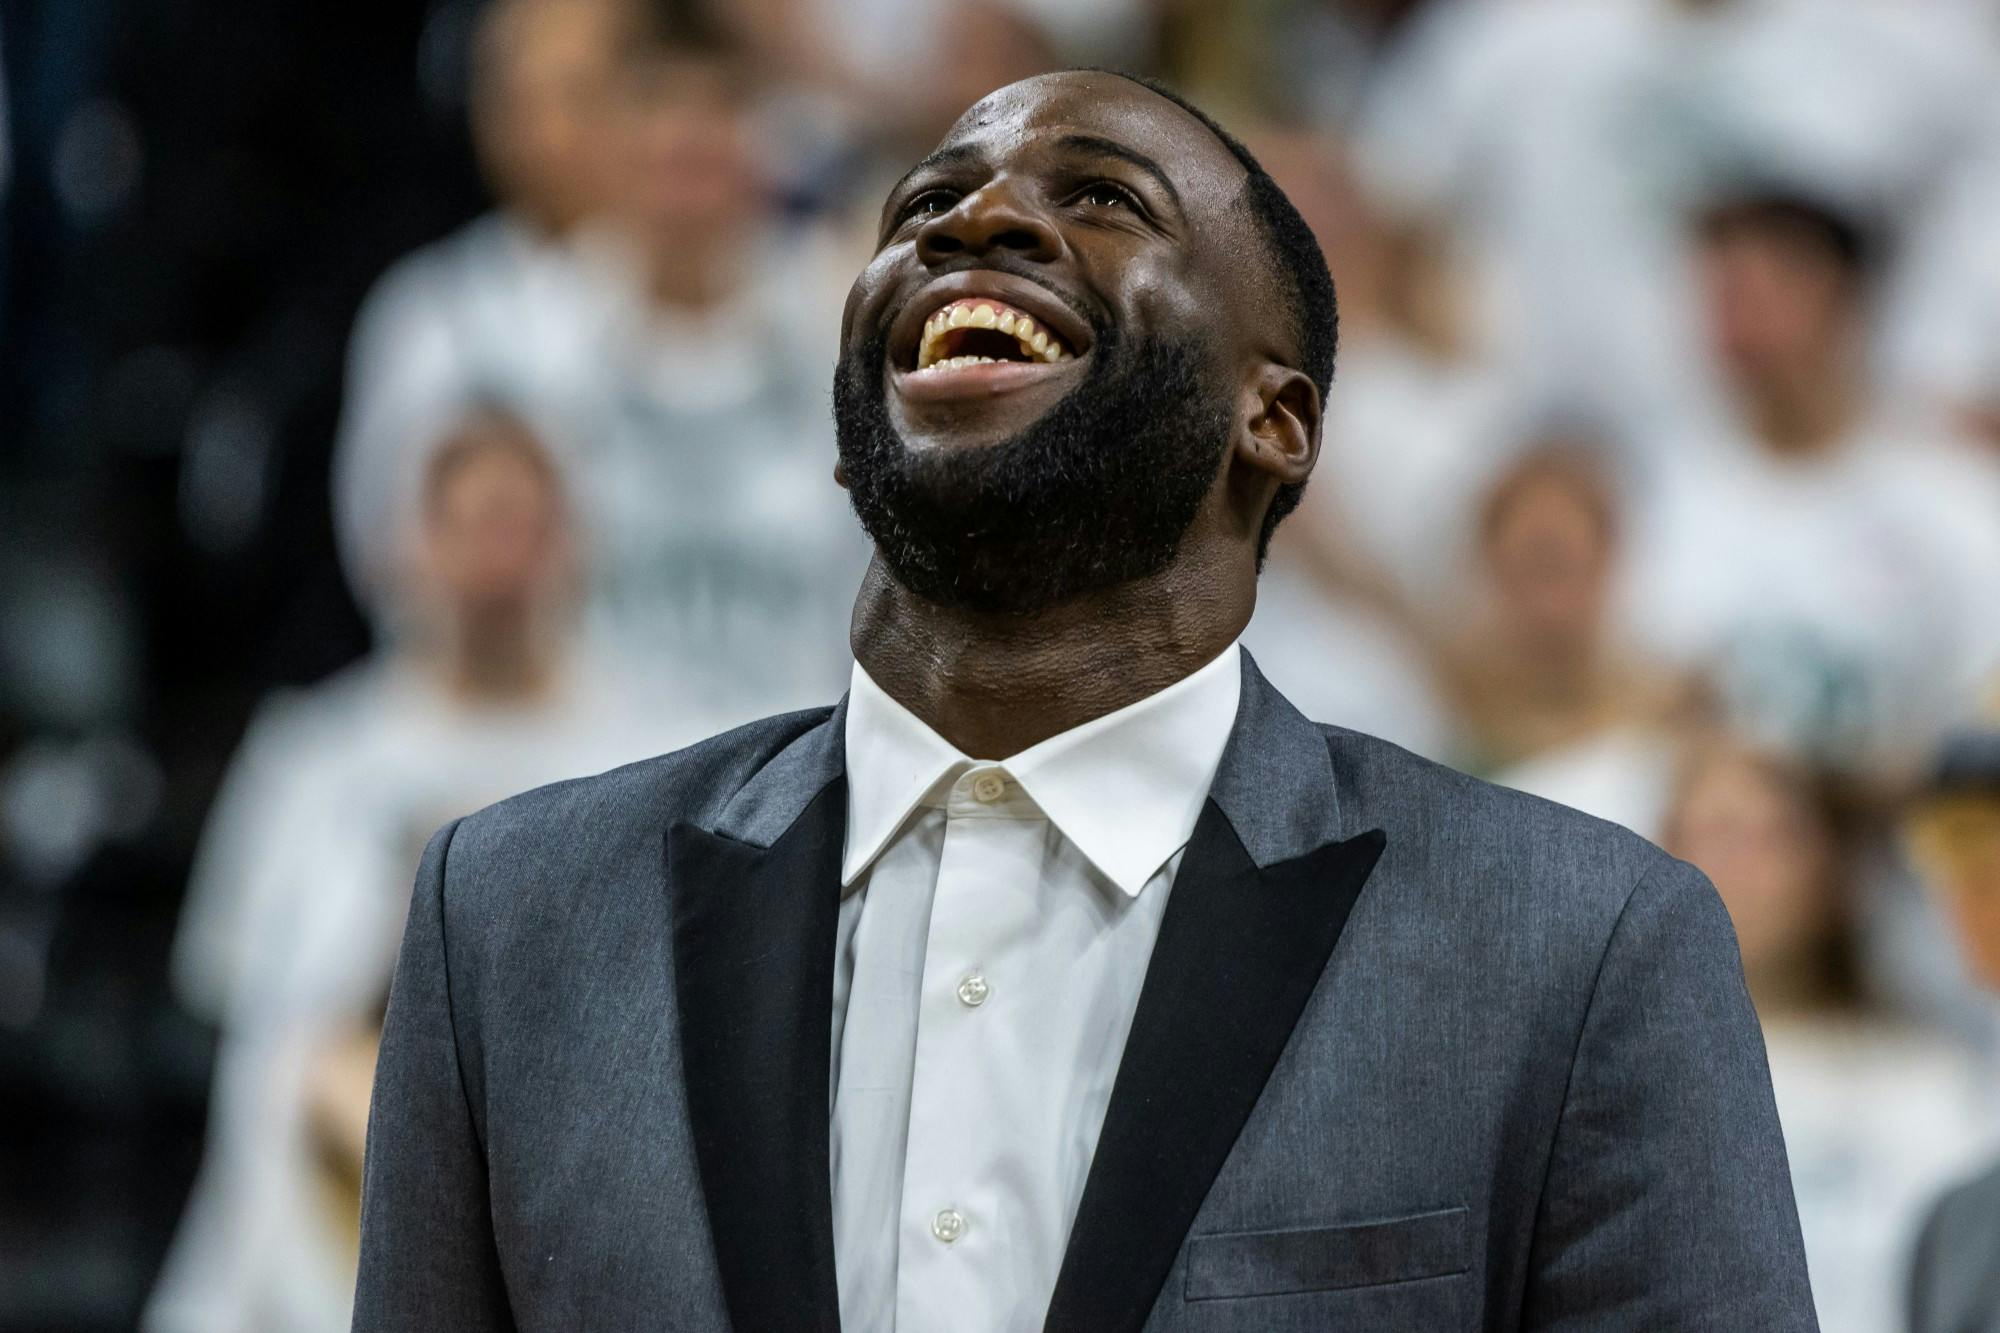 Former MSU and current Golden State Warriors basketball player Draymond Green laughs during his number-retirement ceremony at the Breslin Student Events Center on December 3, 2019. The Blue Devils defeated the Spartans, 87-75.